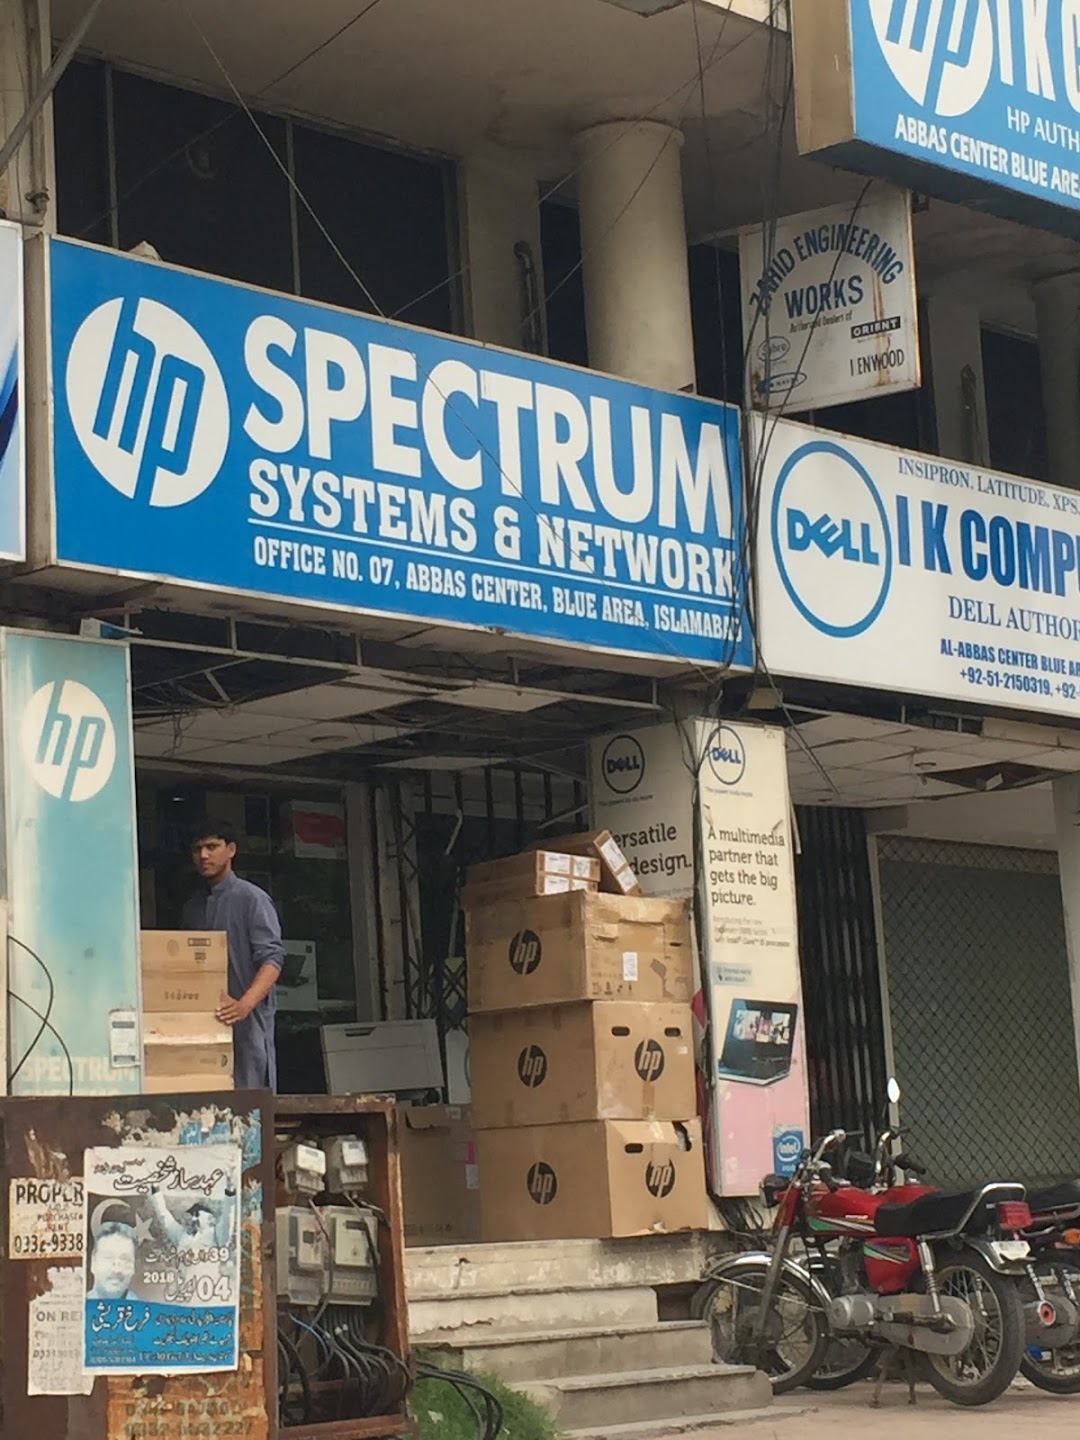 Spectrum Systems & Network